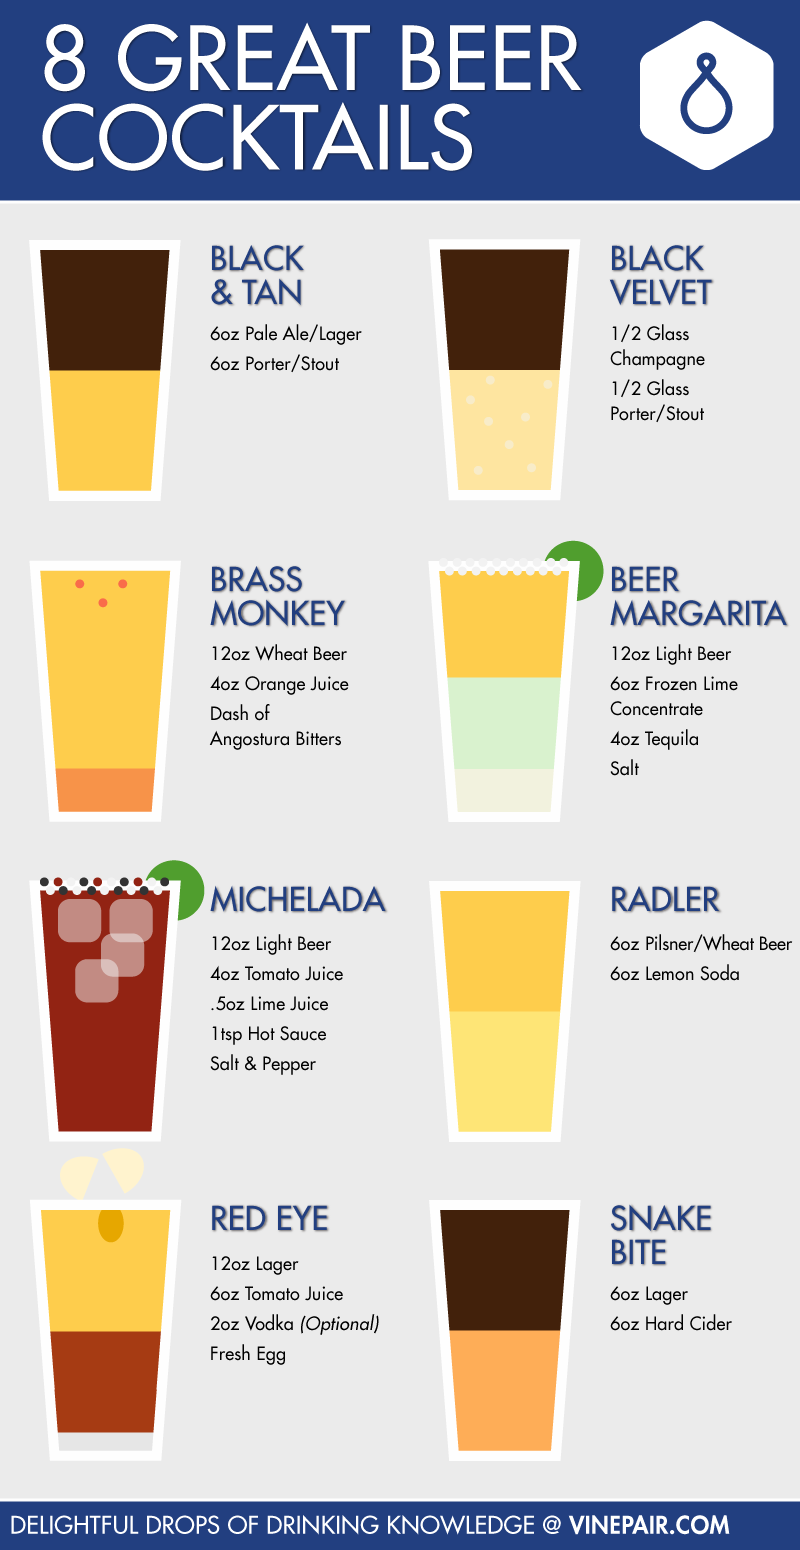 8 Great Beer Cocktails: Infographic